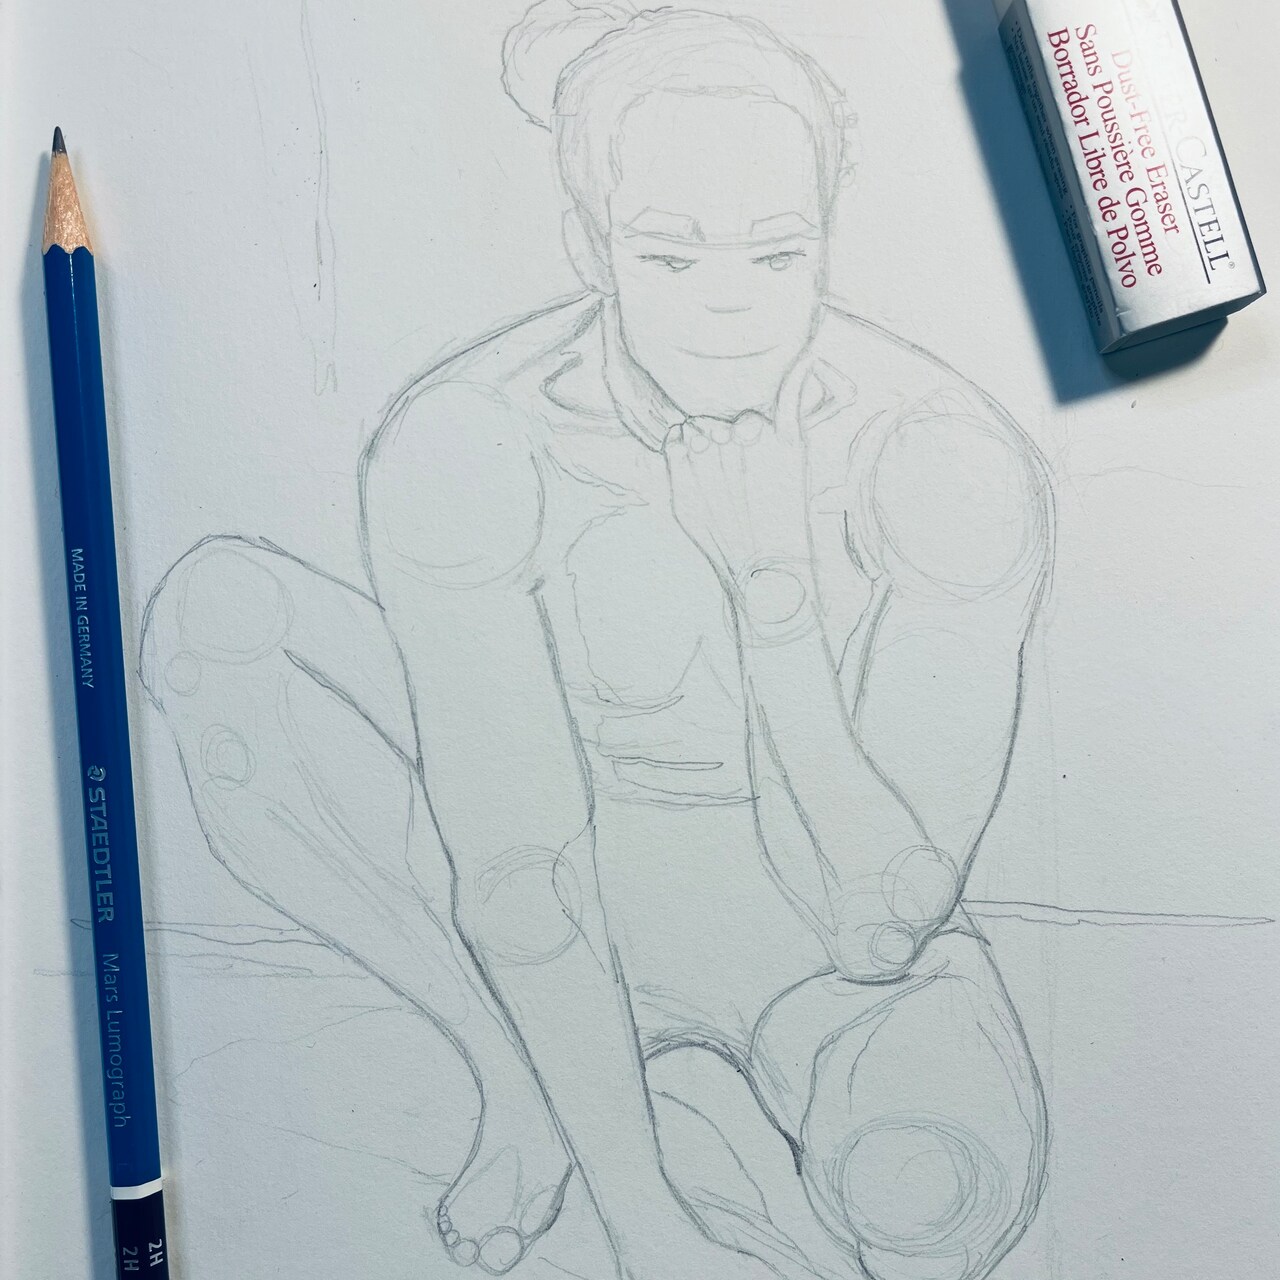 Sketching a Crouching Figure with @AdrienneHodgeArt